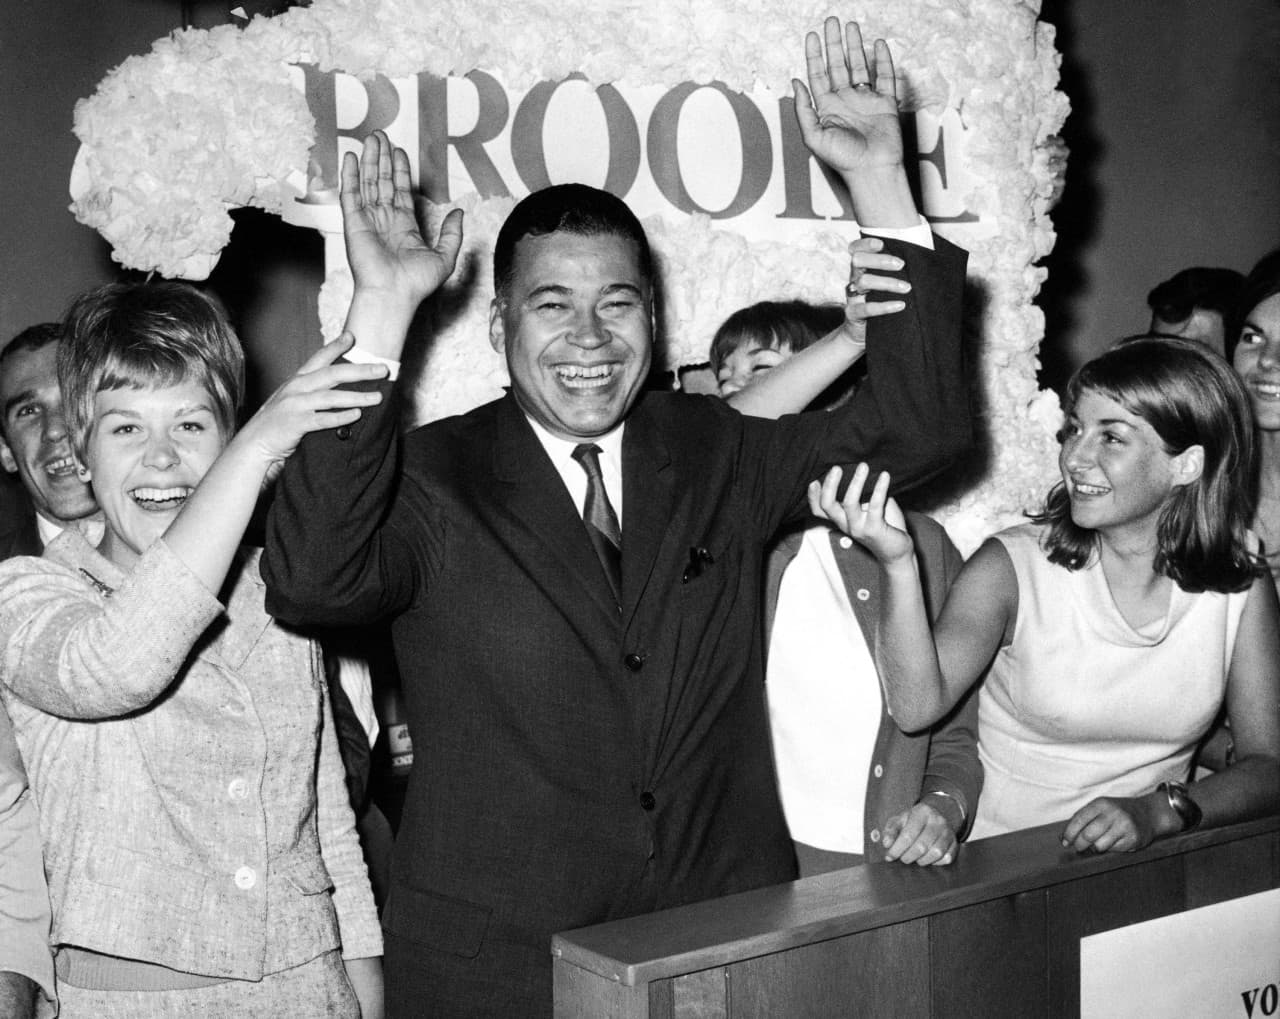 This Sept. 14, 1966, file photo shows Edward W. Brooke joining campaign workers in celebration, in Boston, after winning the Republican nomination for U.S. Senate. (AP)